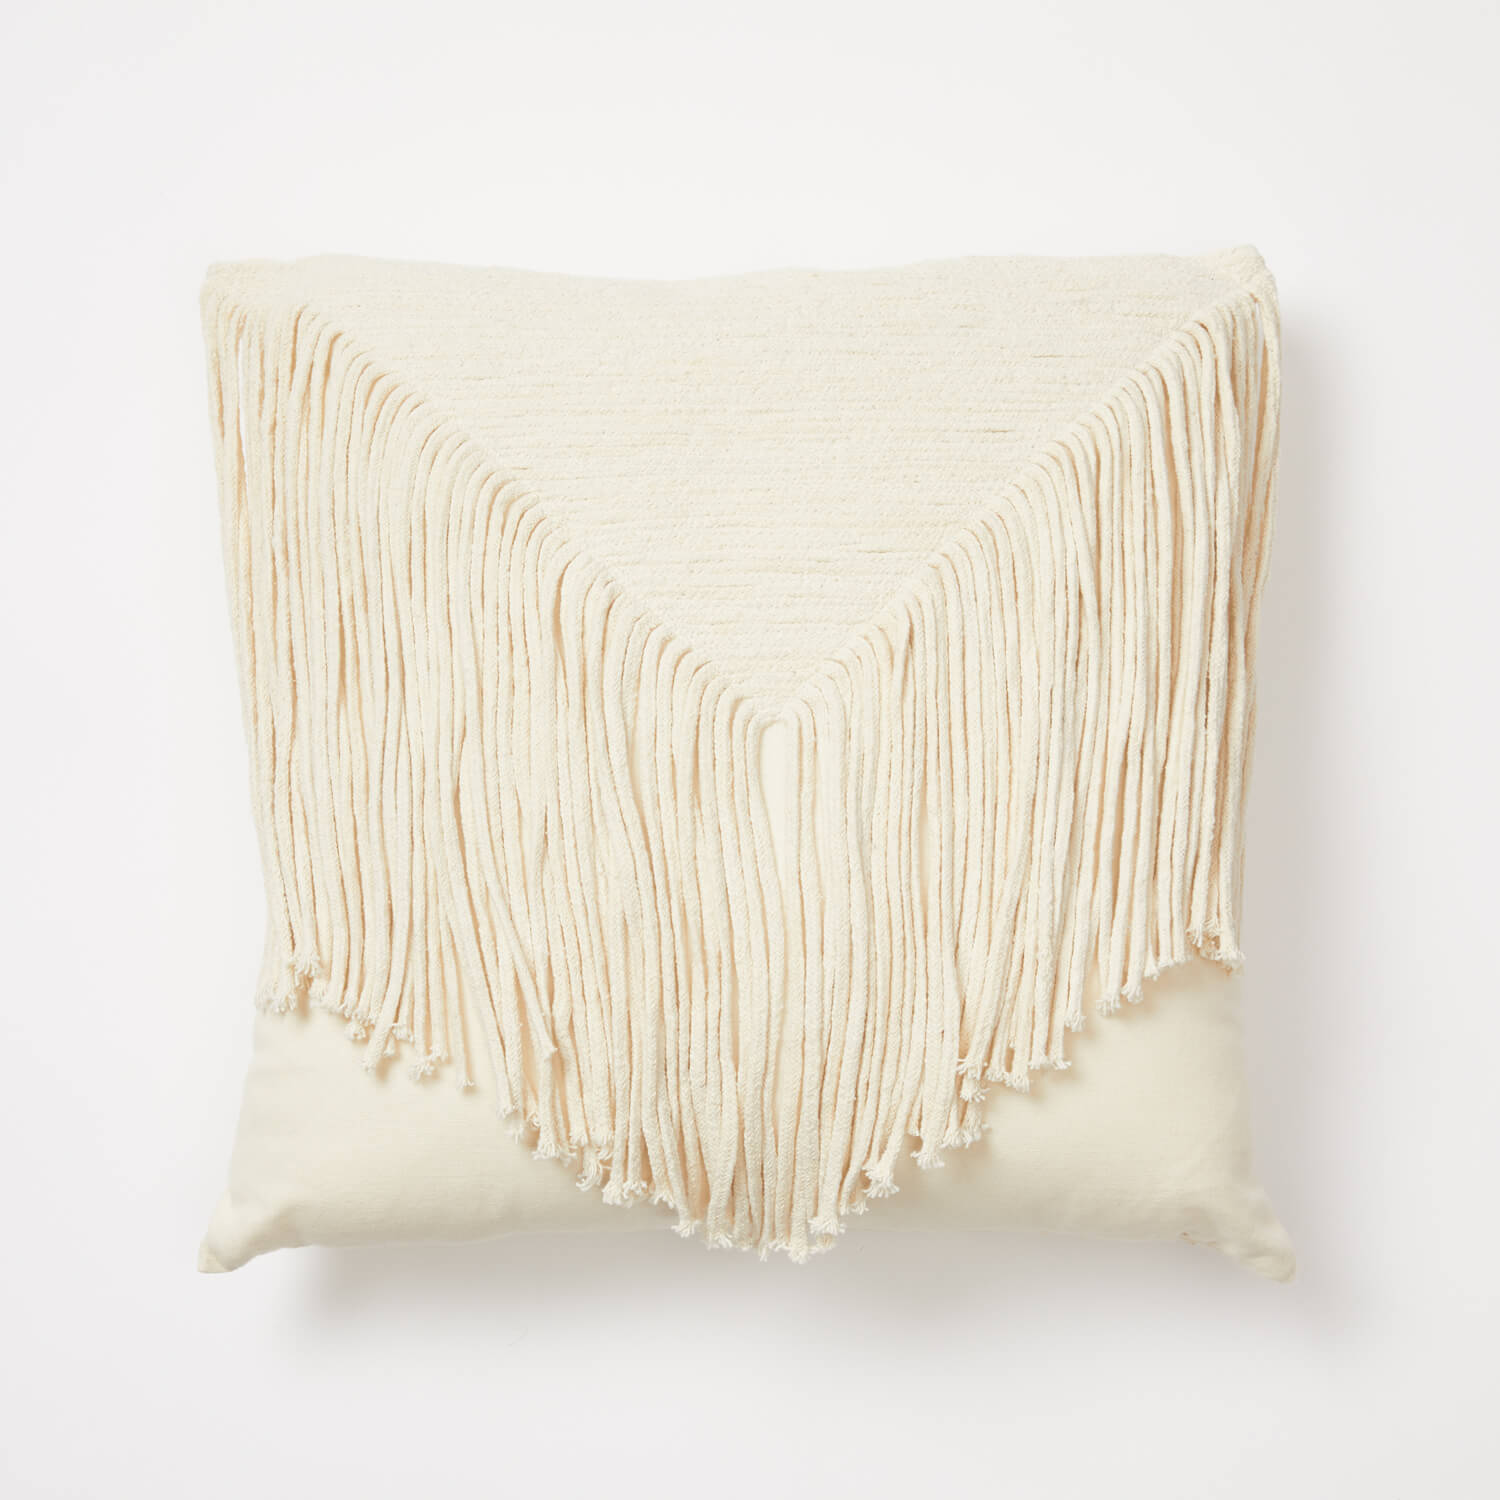 Dormify Desert Fringe Square Pillow, 20" X 20", Ultra-cute Styles To Personalize Your Room In Beige